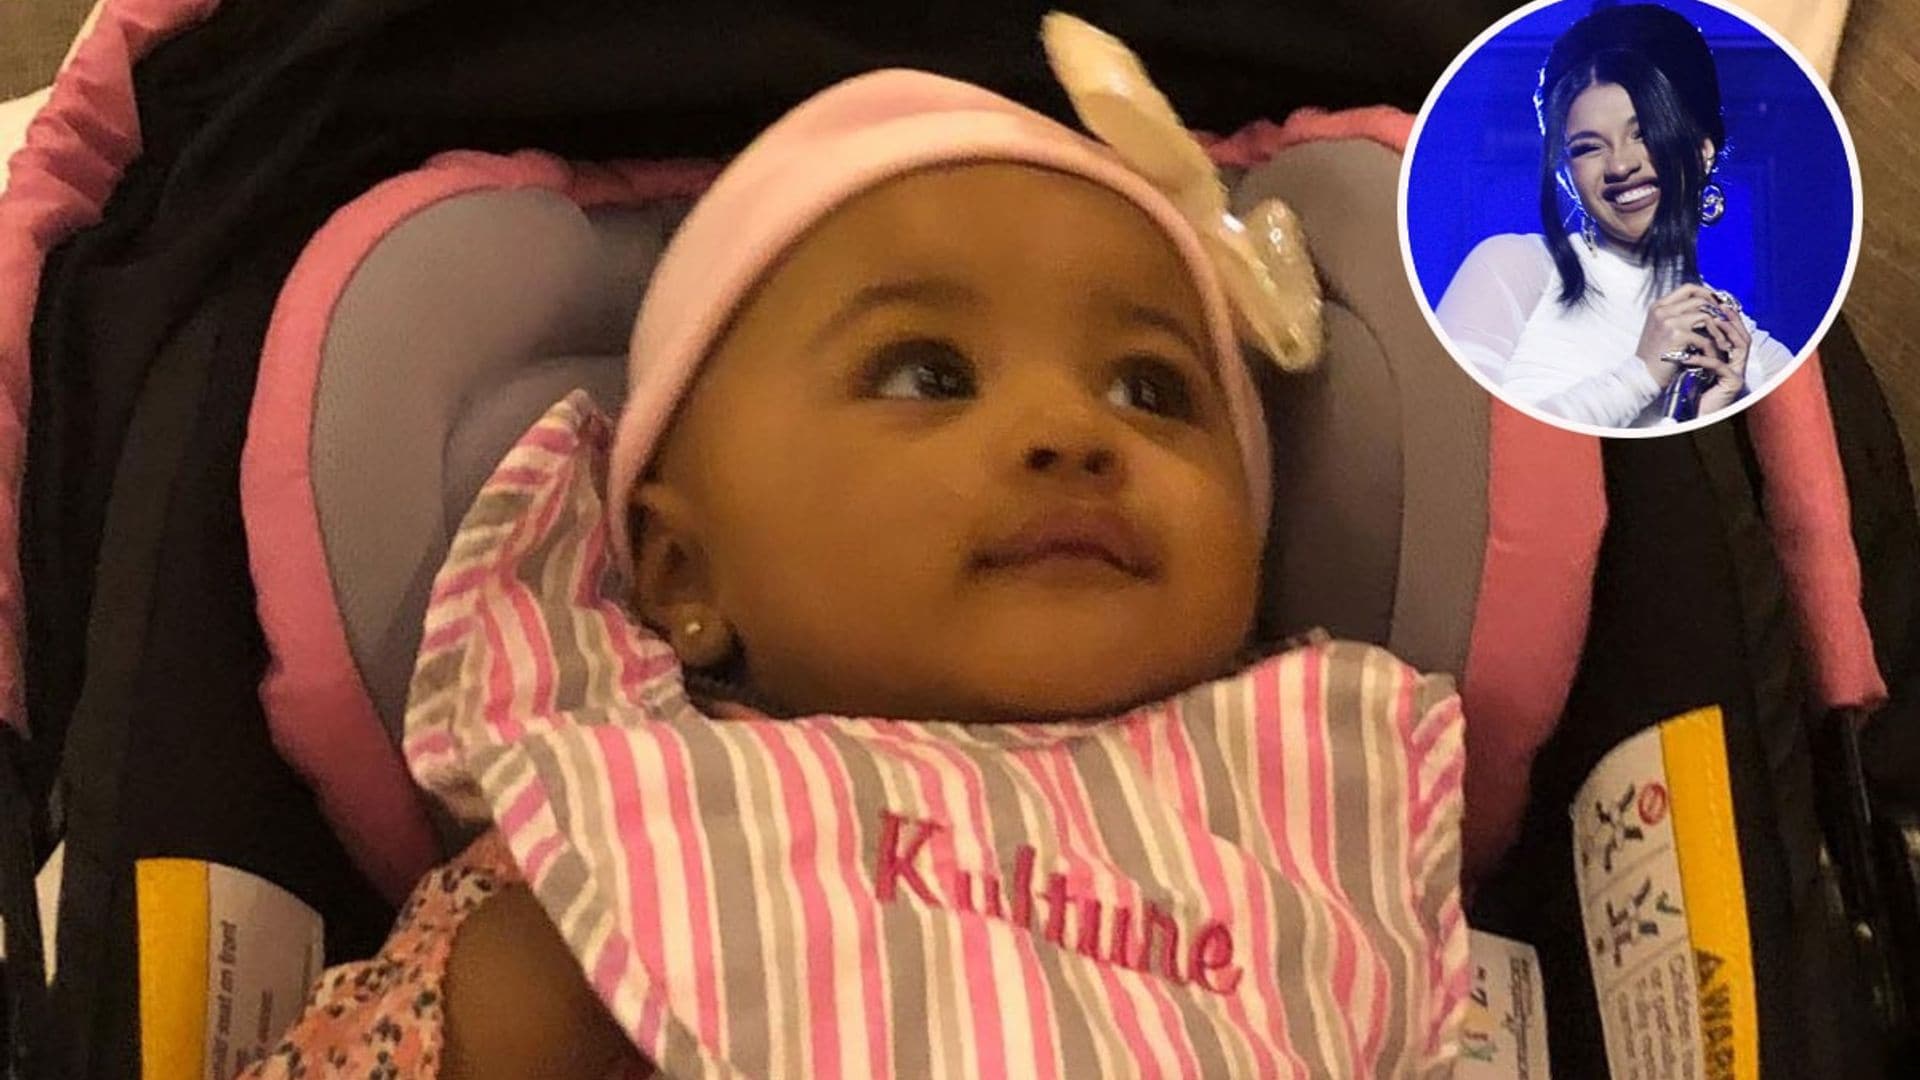 Cardi B and Offset's daughter adorably dances to her father's music in rare video